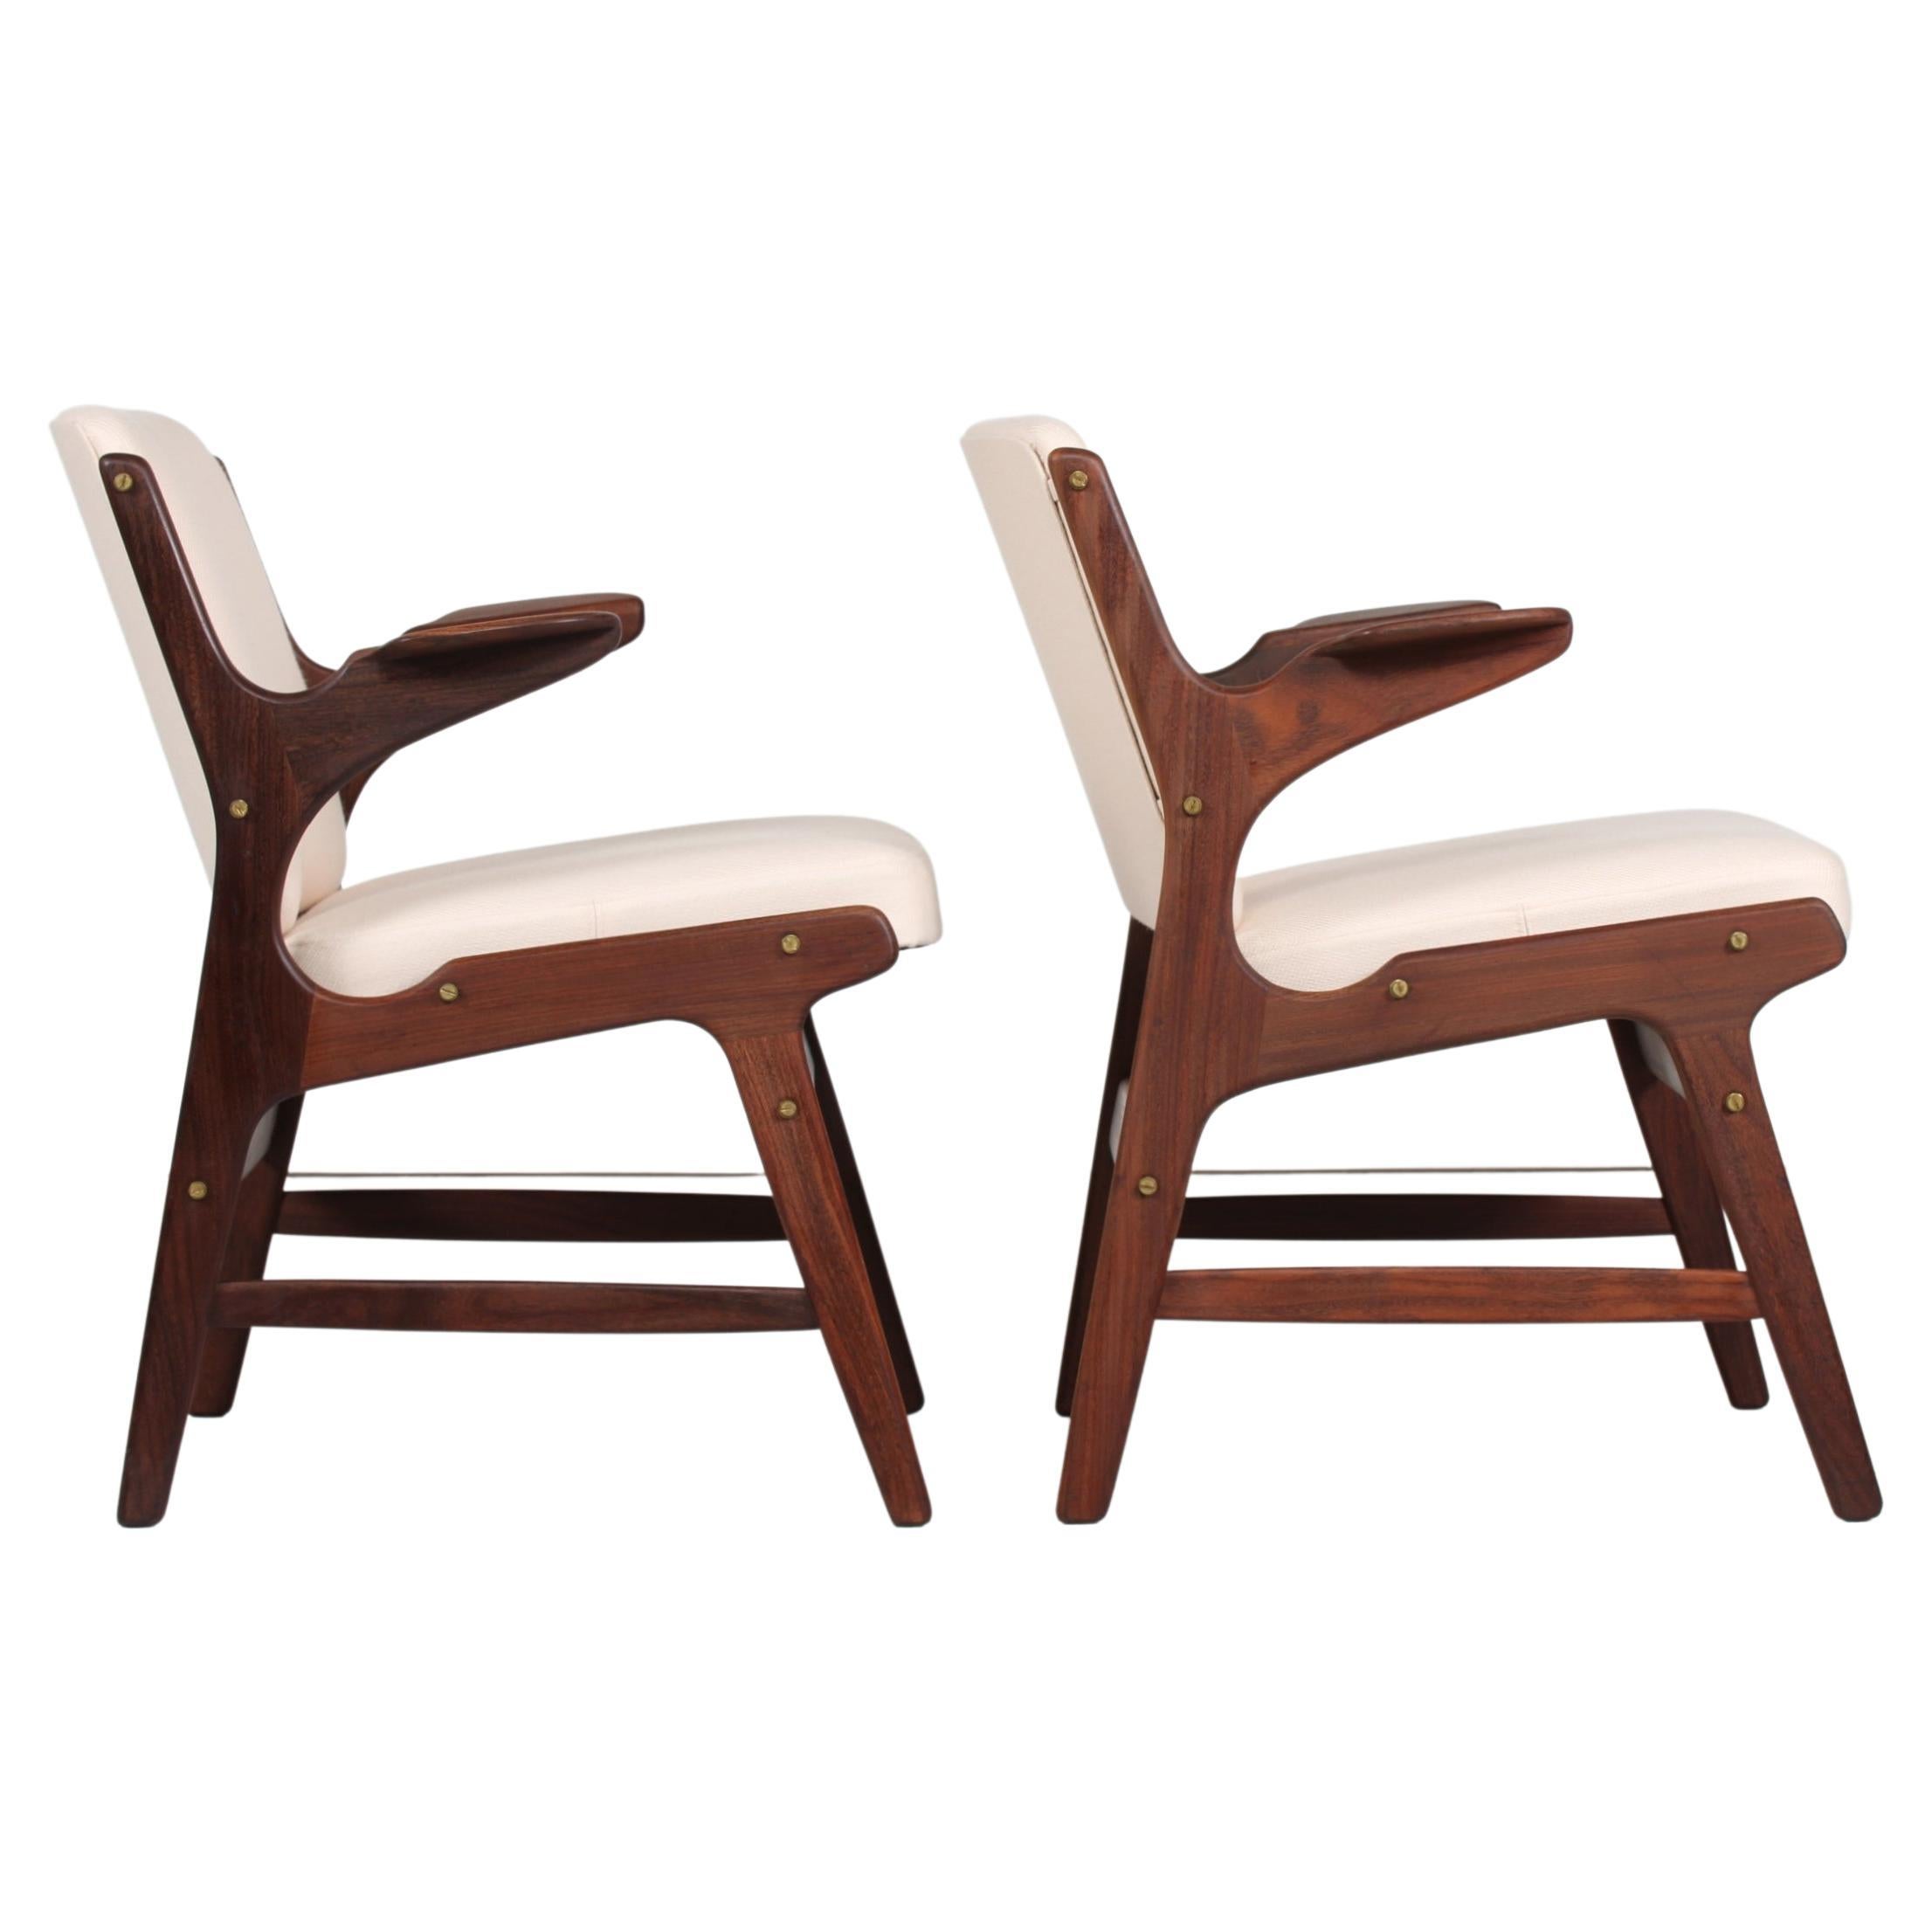 Pair of mid century easy armchairs model 310 by Arne Hovmand-Olsen
They are made in Denmark in the 1960s by A. R. Klingenberg & Søn

The frames are made of solid teak with brass screws and have upholstery with light fabric.


